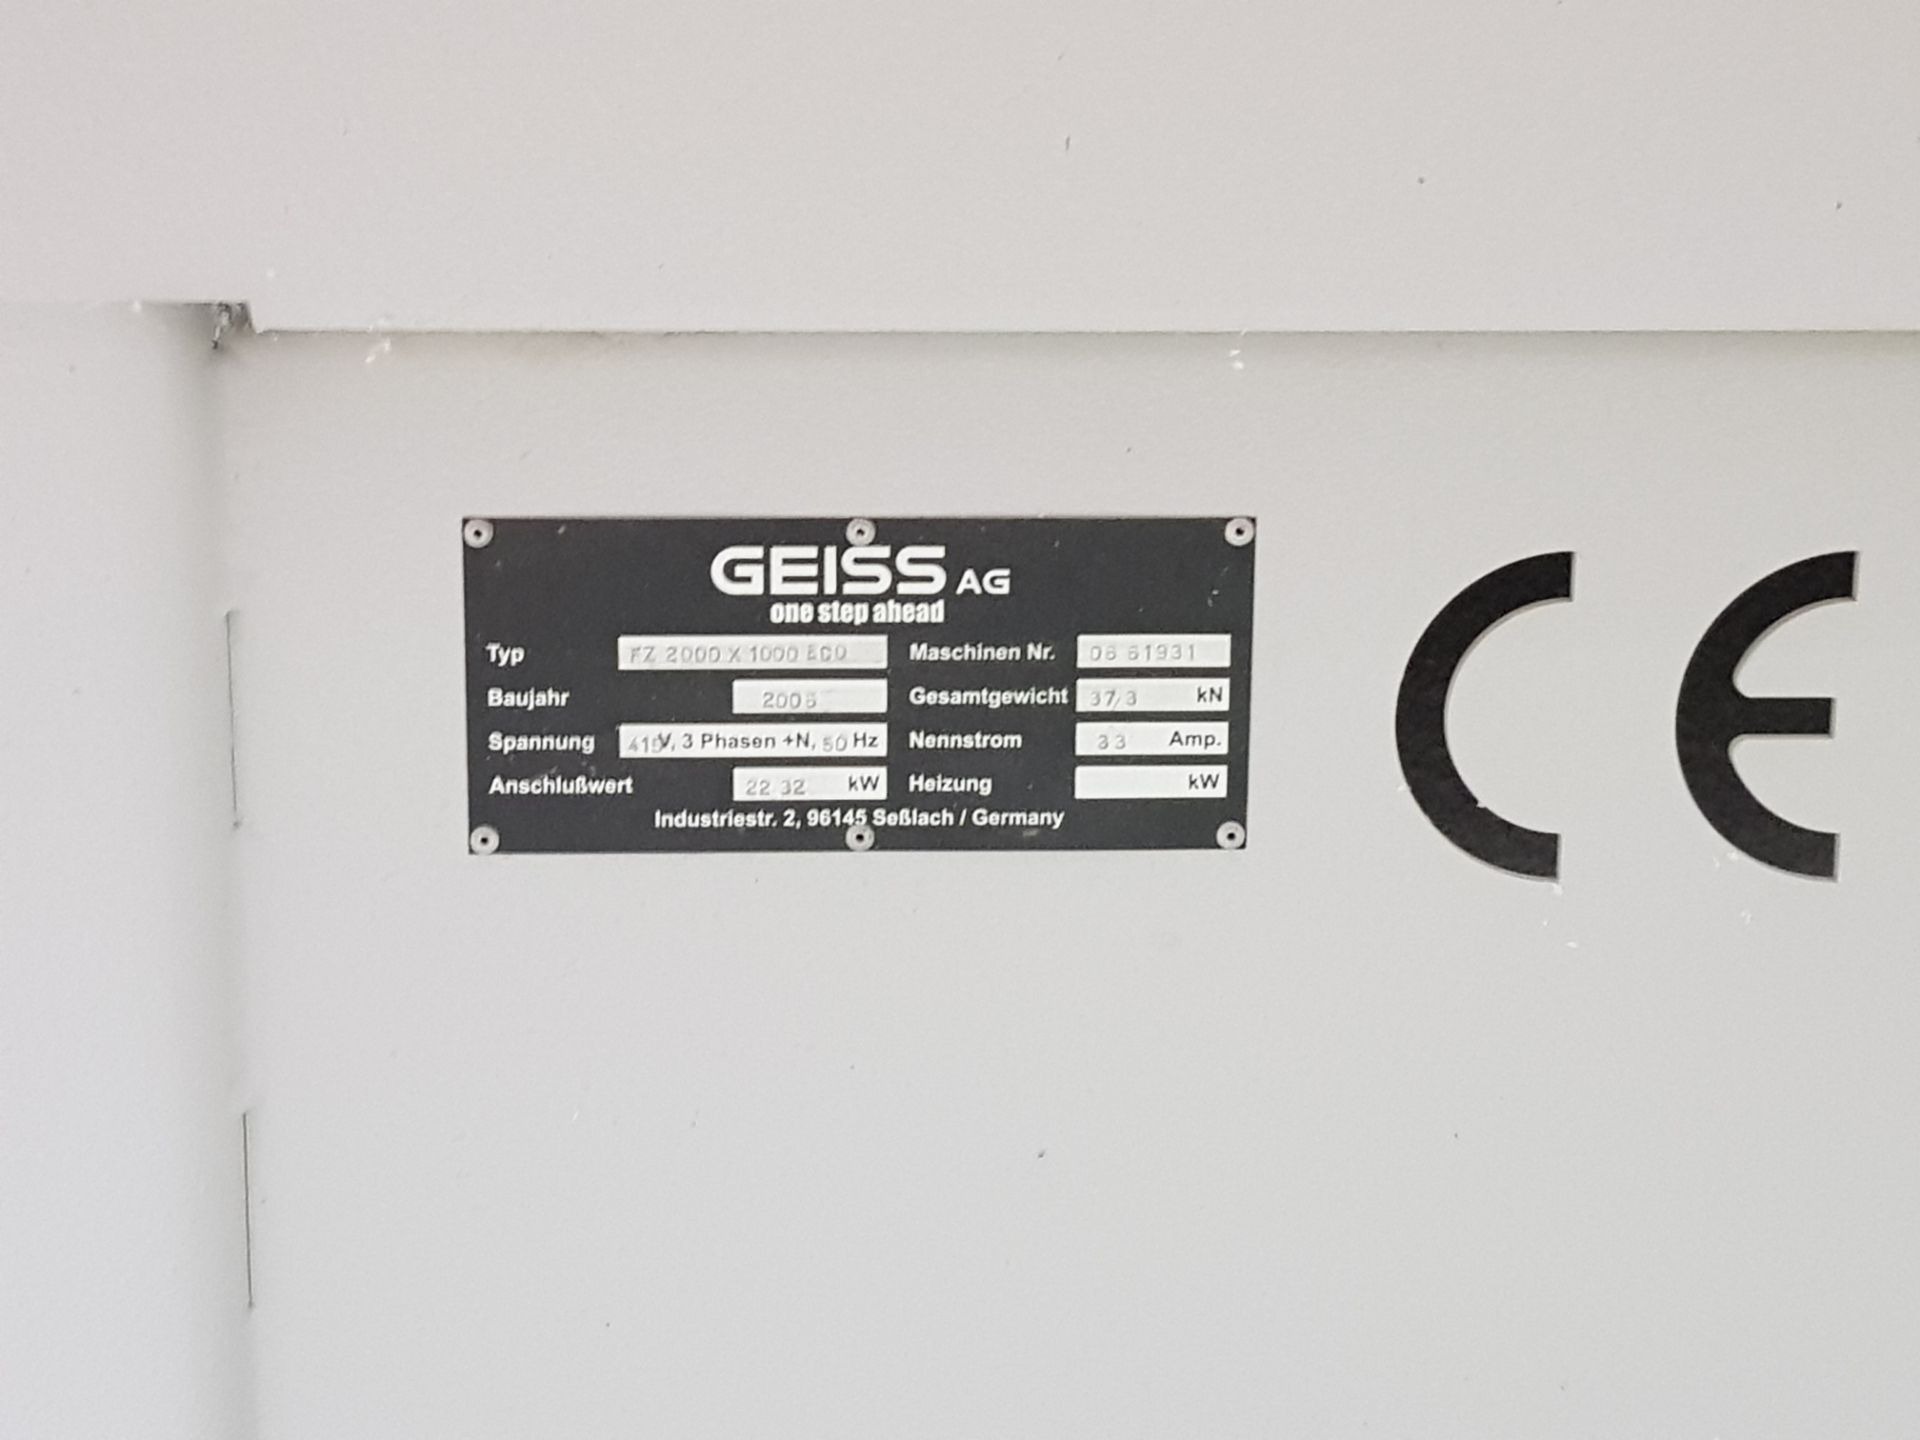 GEISS F2 ECO 5 AXIS CNC TRIMMING MACHINE, (ORDER NO 61931, MC NO 60) 12 TOOL CHANGER, TOOLING, - Image 7 of 10